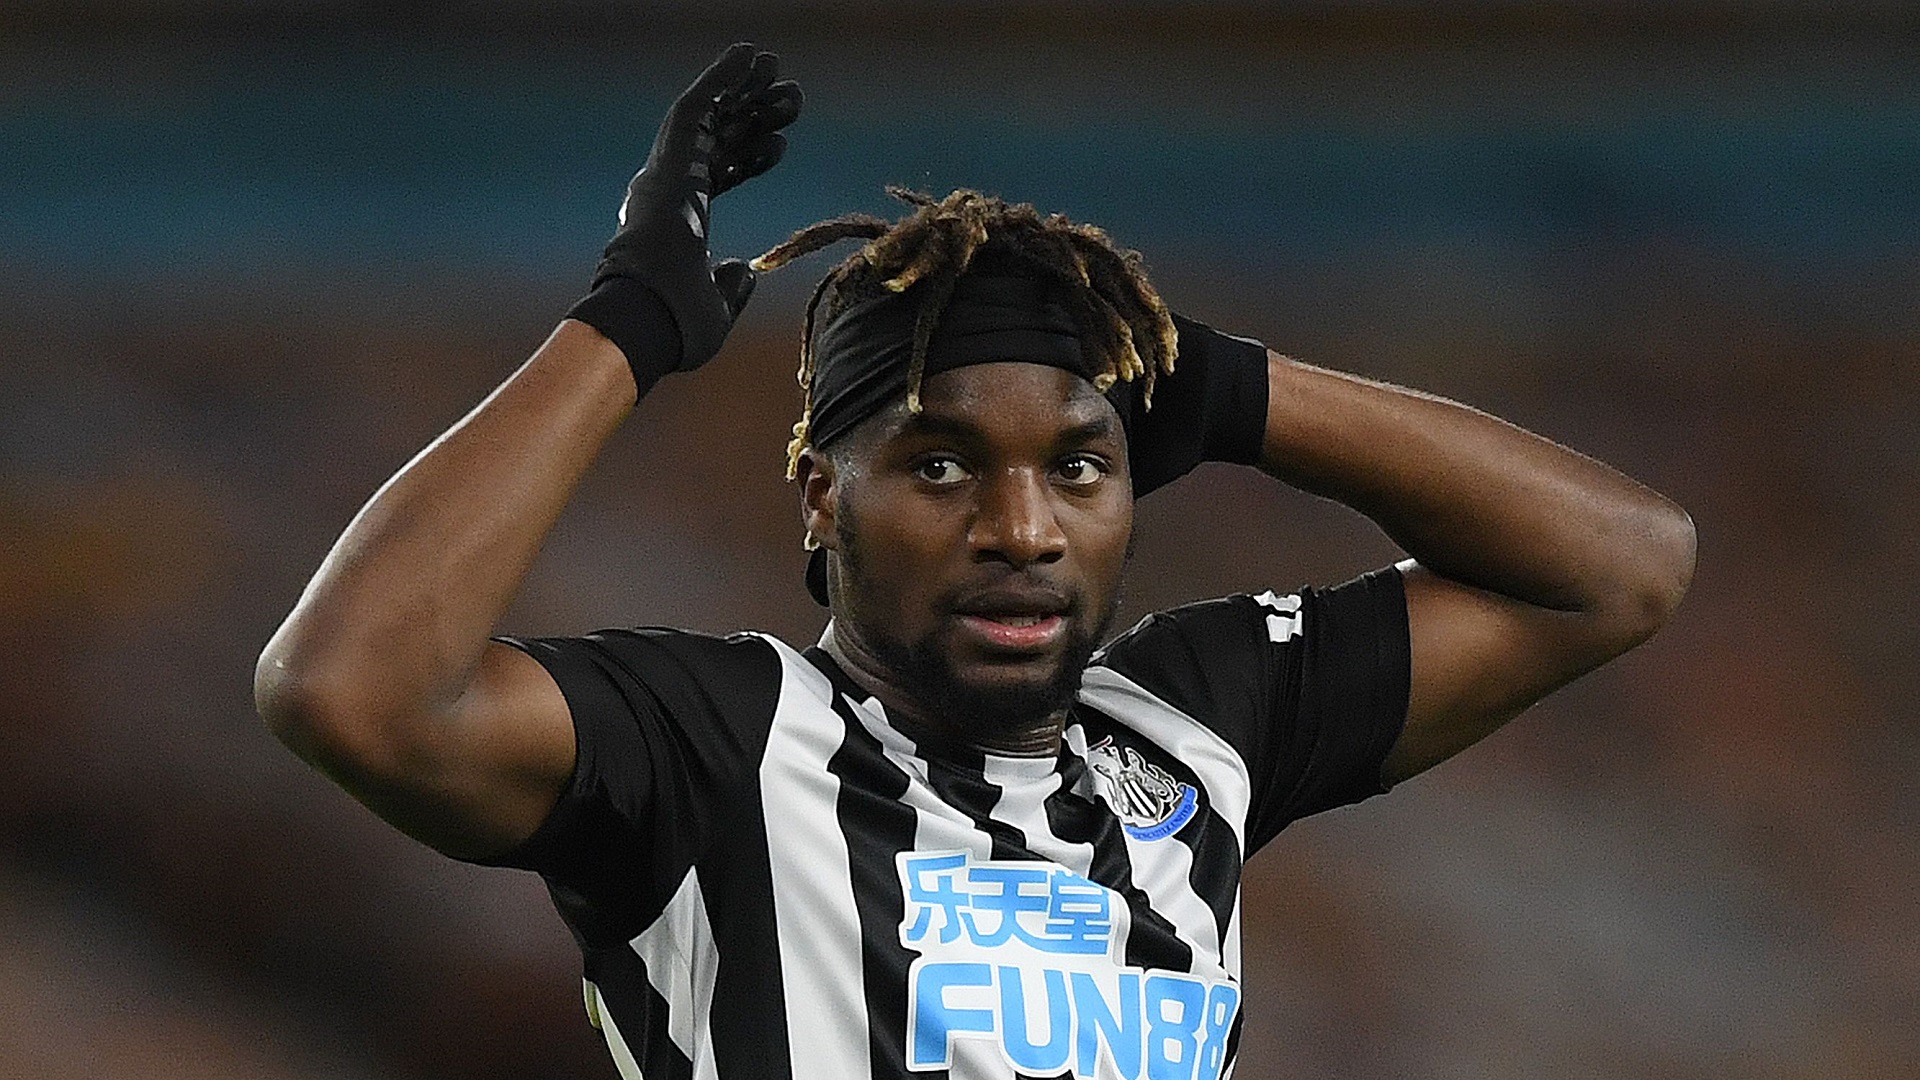 'I feel great!' - Saint-Maximin denies suffering lasting effects from Covid-19 & squashes talk of Bruce rift